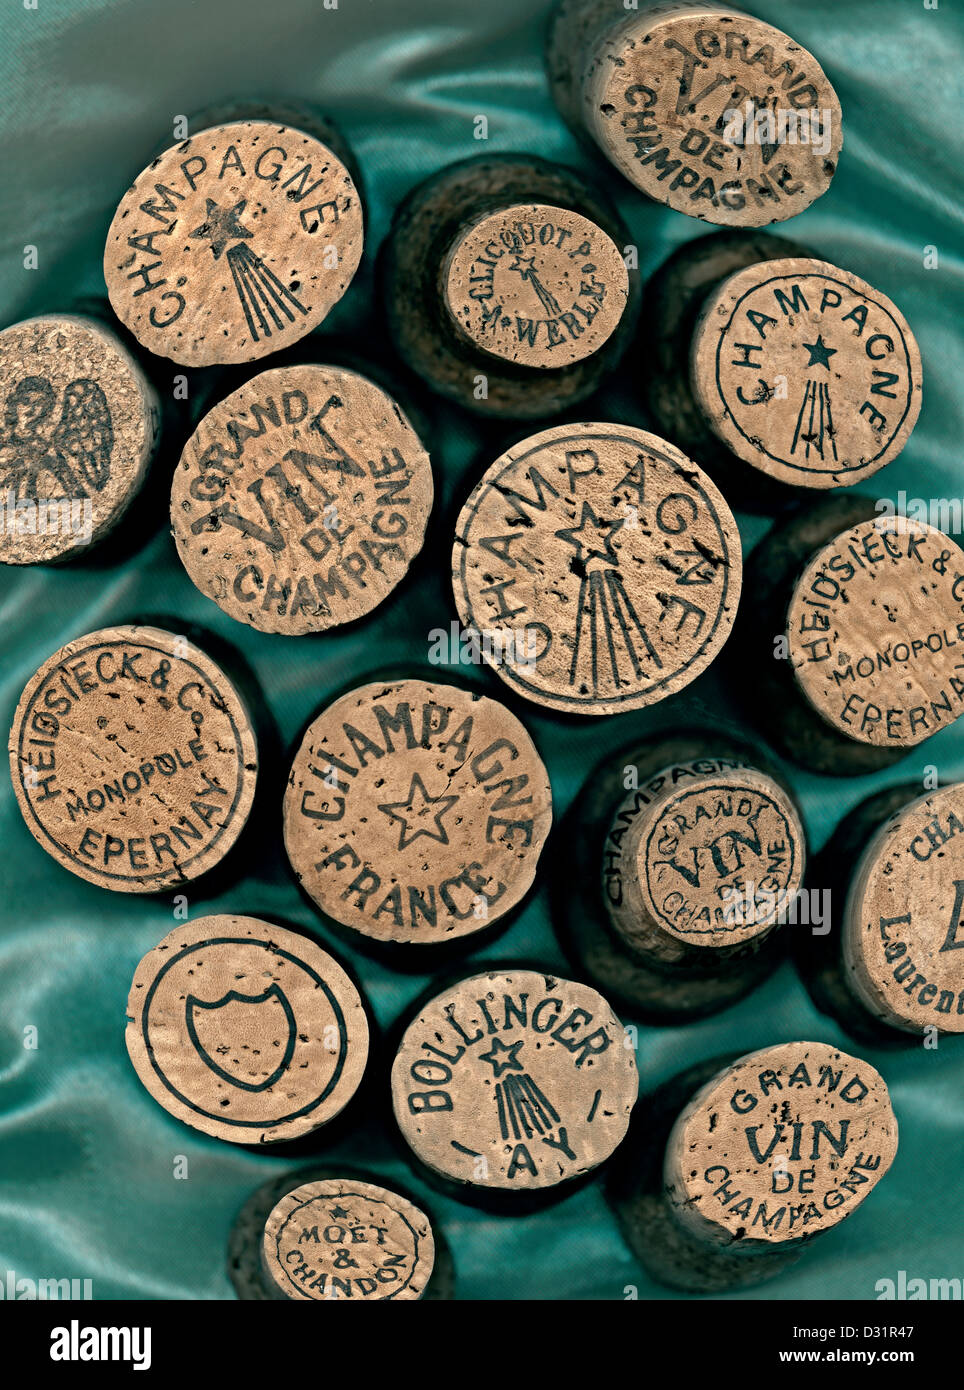 Selection of fine French champagne corks including Dom Perignon, Bollinger, Heidsieck ,Veuve Clicquot and Moet Chandon France Stock Photo